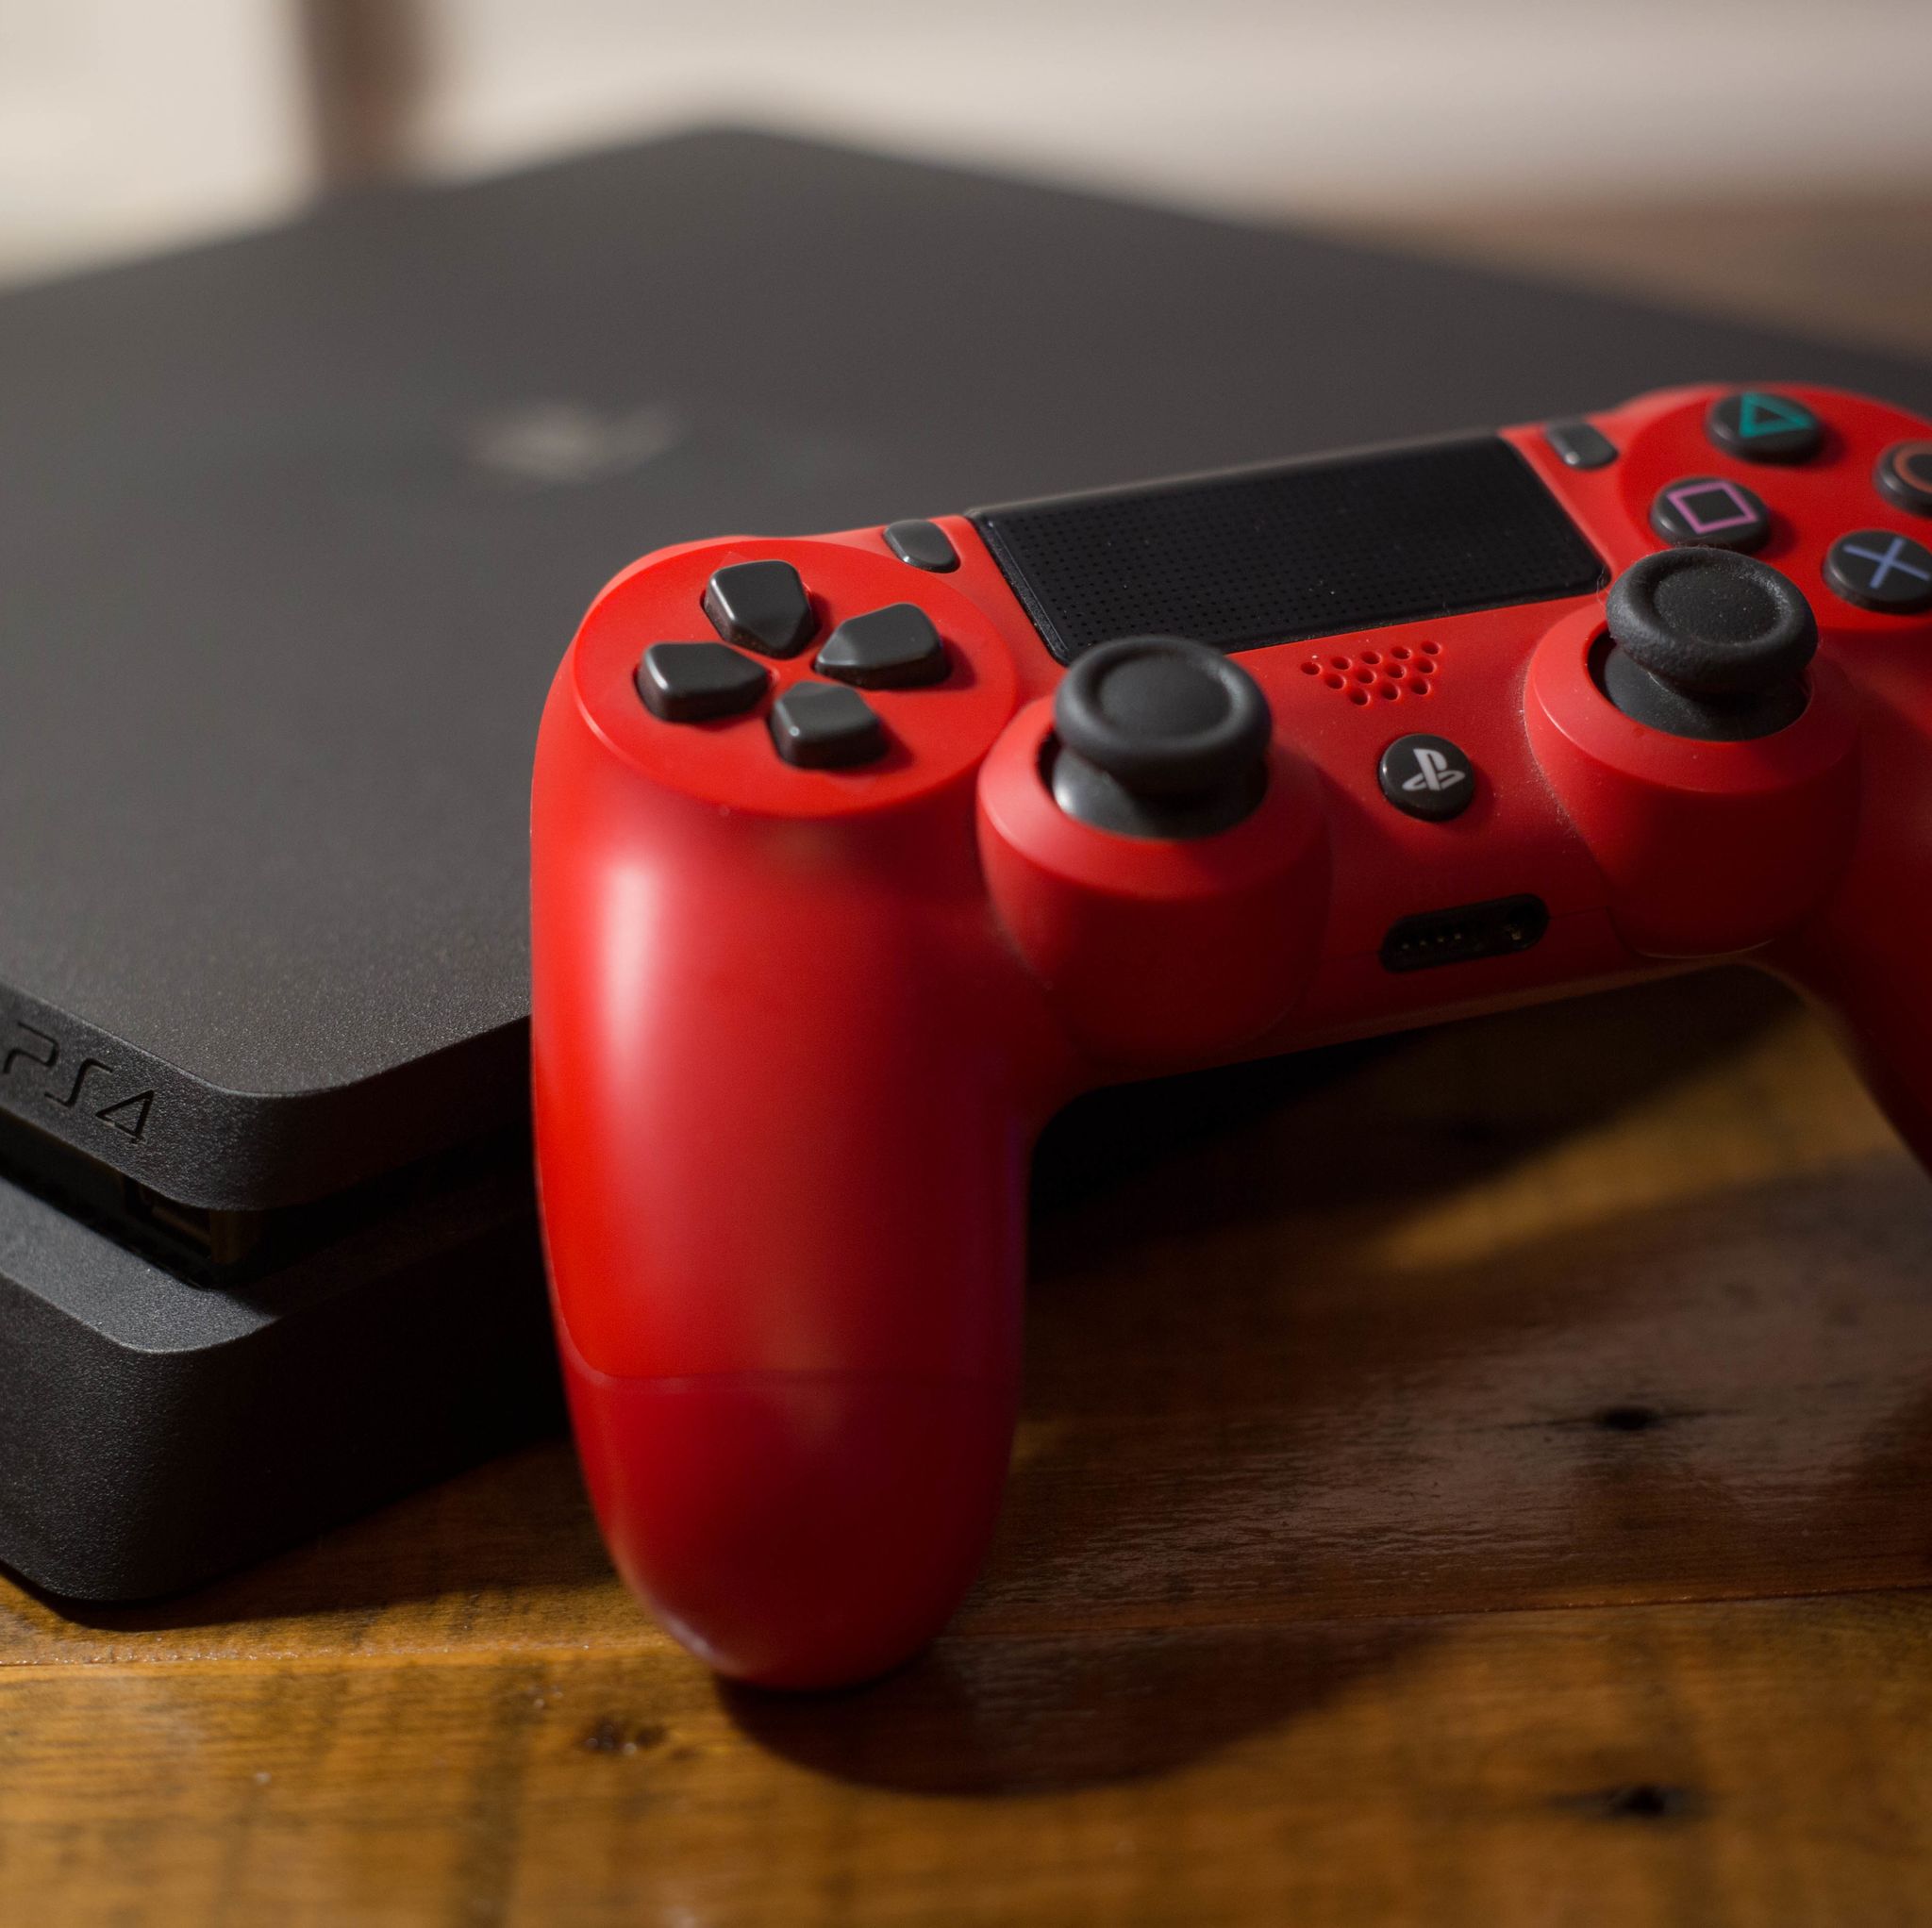 Telegraf Uafhængighed frimærke You Can Play Your PS4 From Your Phone Now. Here's How